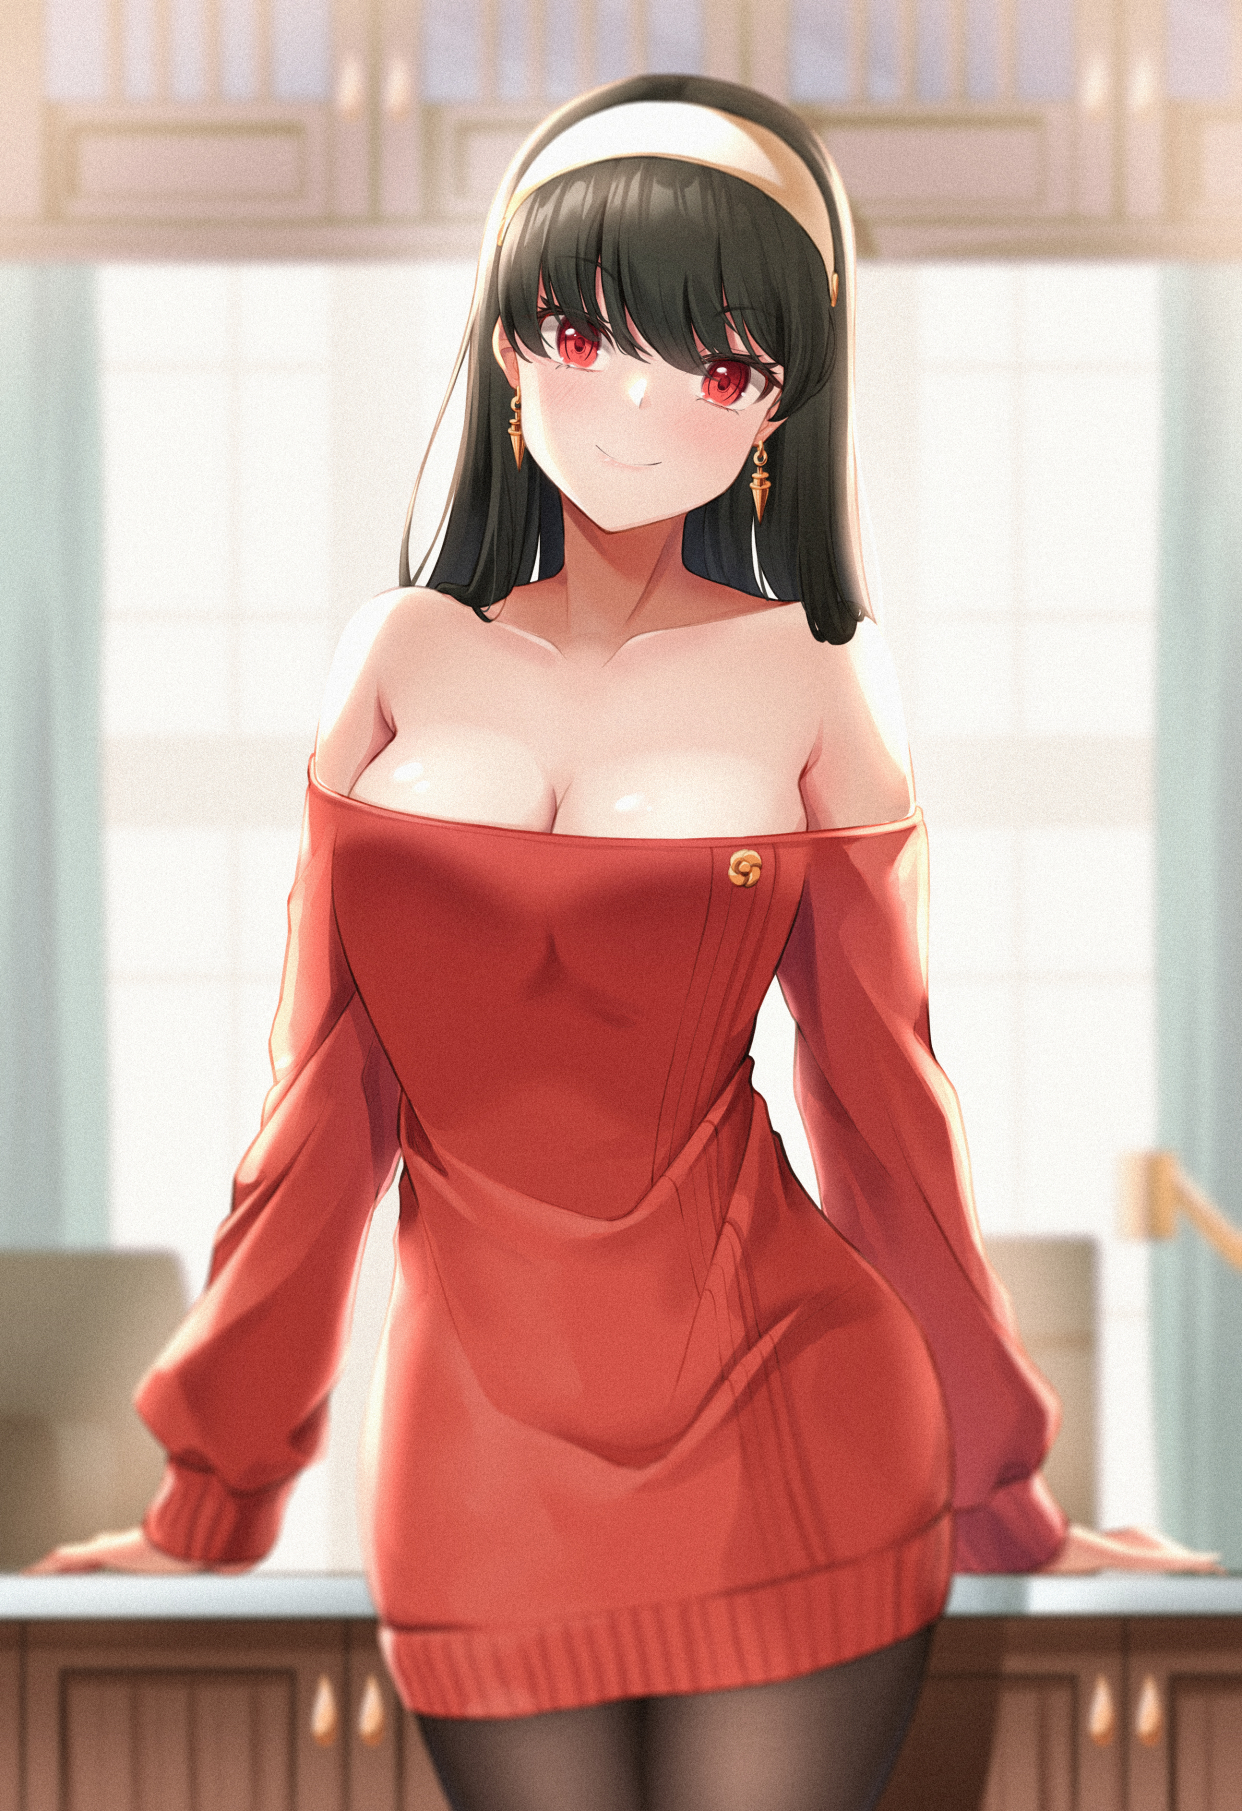 Anime 1242x1811 anime anime girls Spy x Family Yor Forger cleavage red eyes smiling black hair portrait display